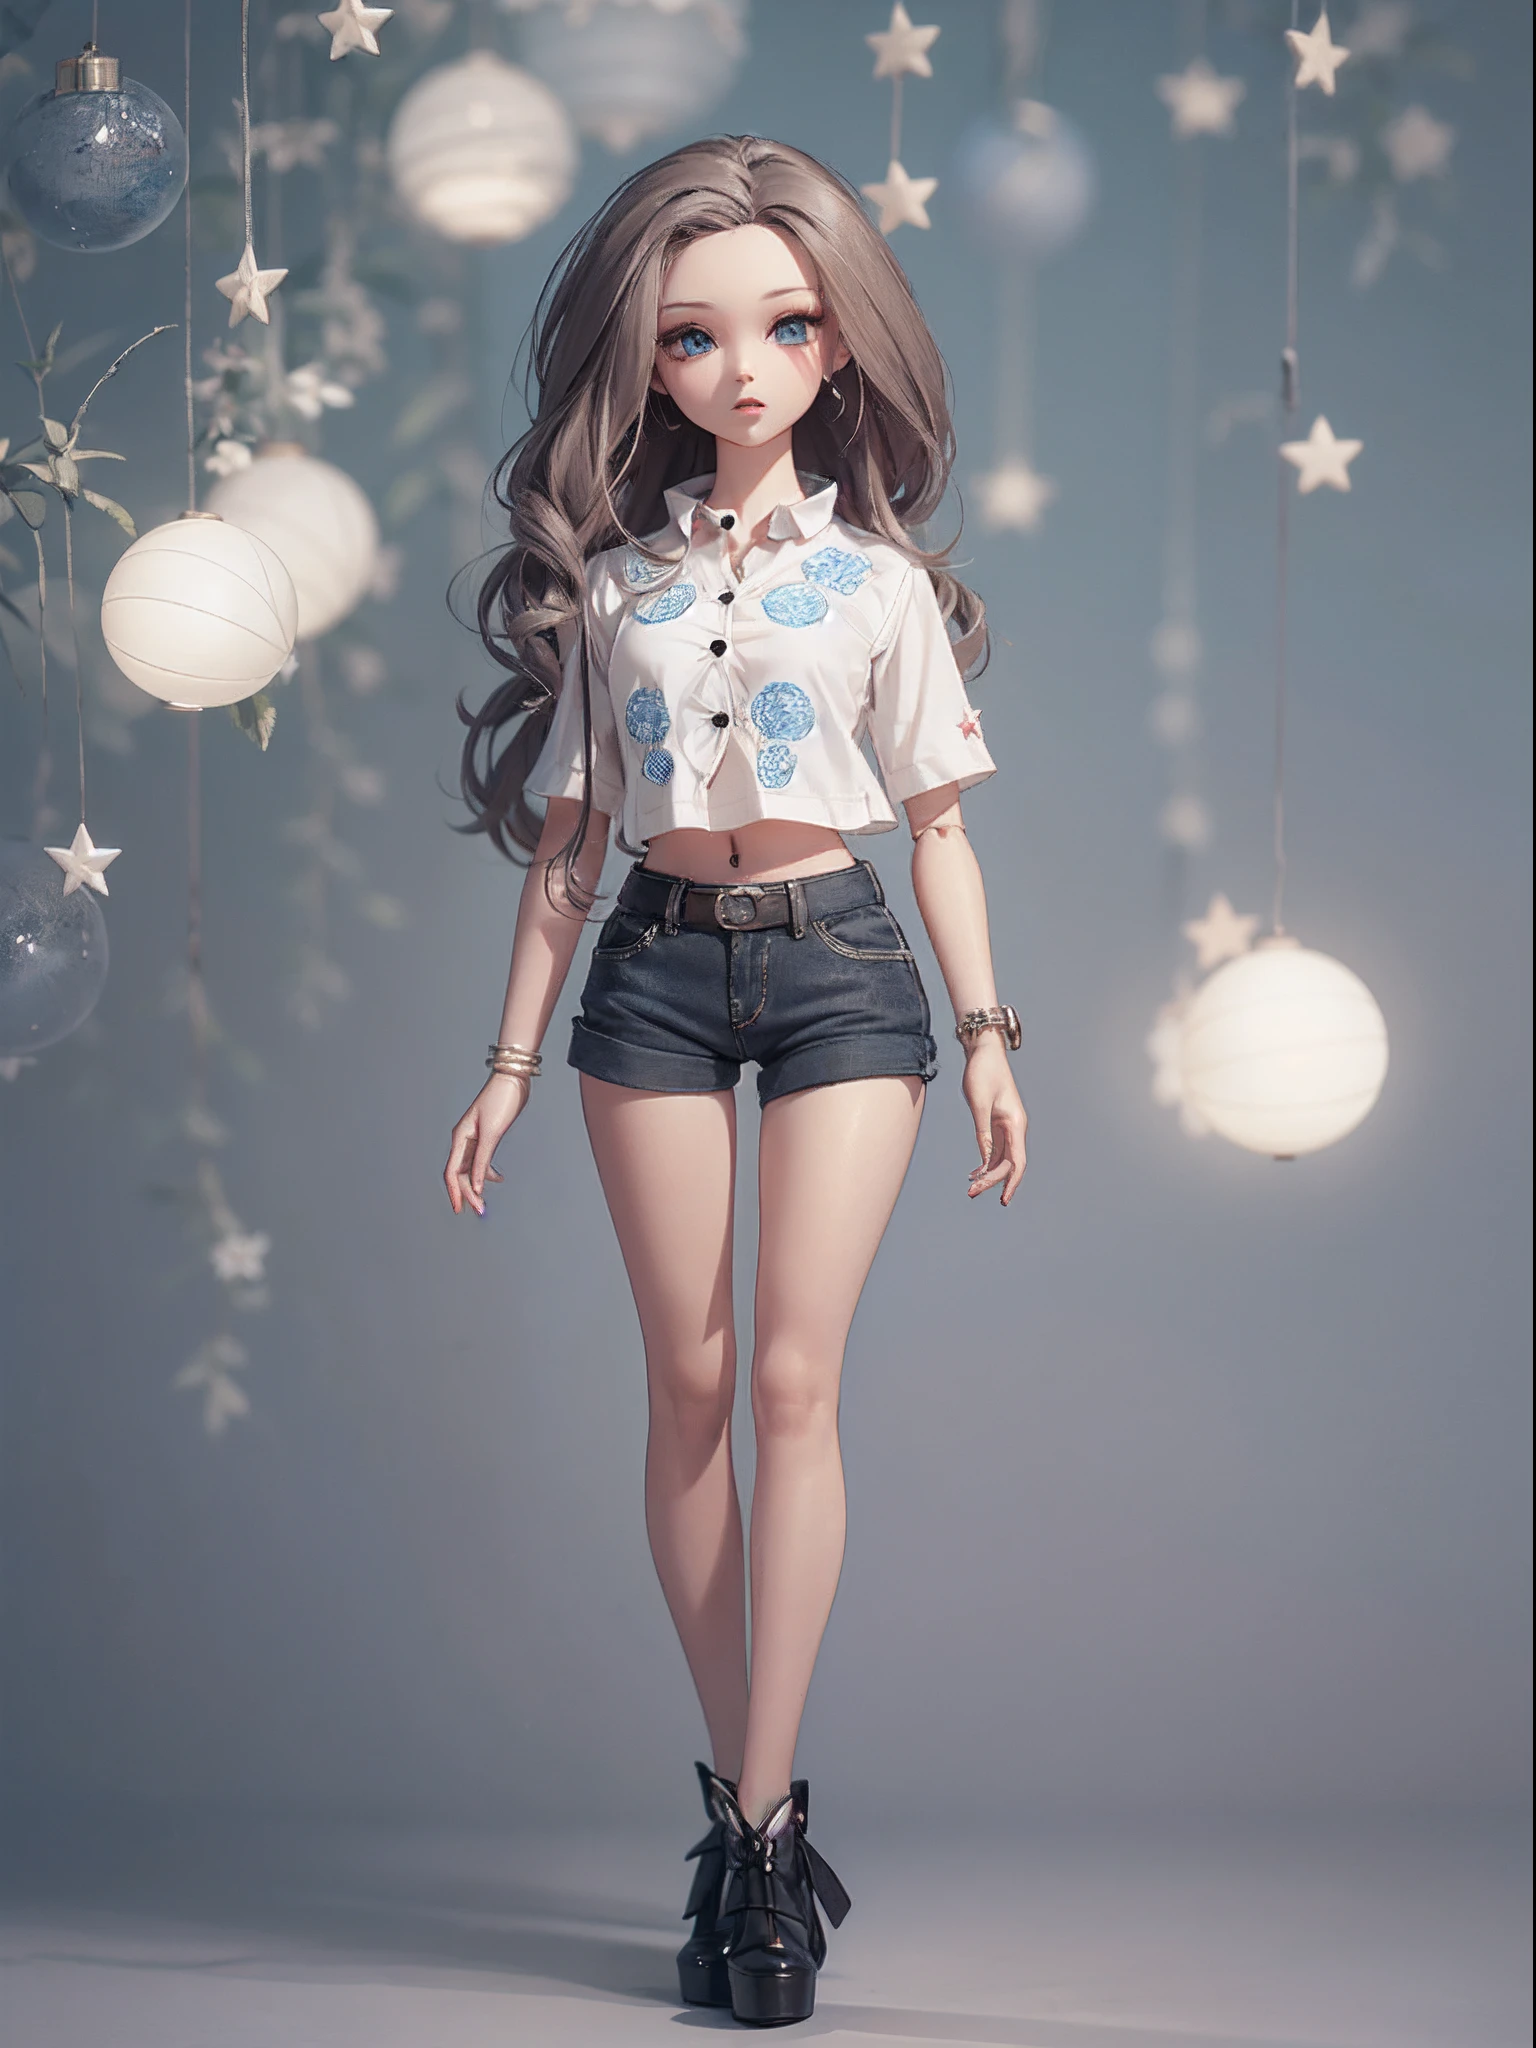 In a soft 3D rendering, (a beautiful ball-jointed doll stands gracefully:1.2). She is dressed in a stylish crop top girly shirt with a star pattern and a crop top length and hot pants. The doll's delicate features are expertly crafted, and she exudes an air of sophistication and refinement. It's a stunning image, full of beauty and detail.